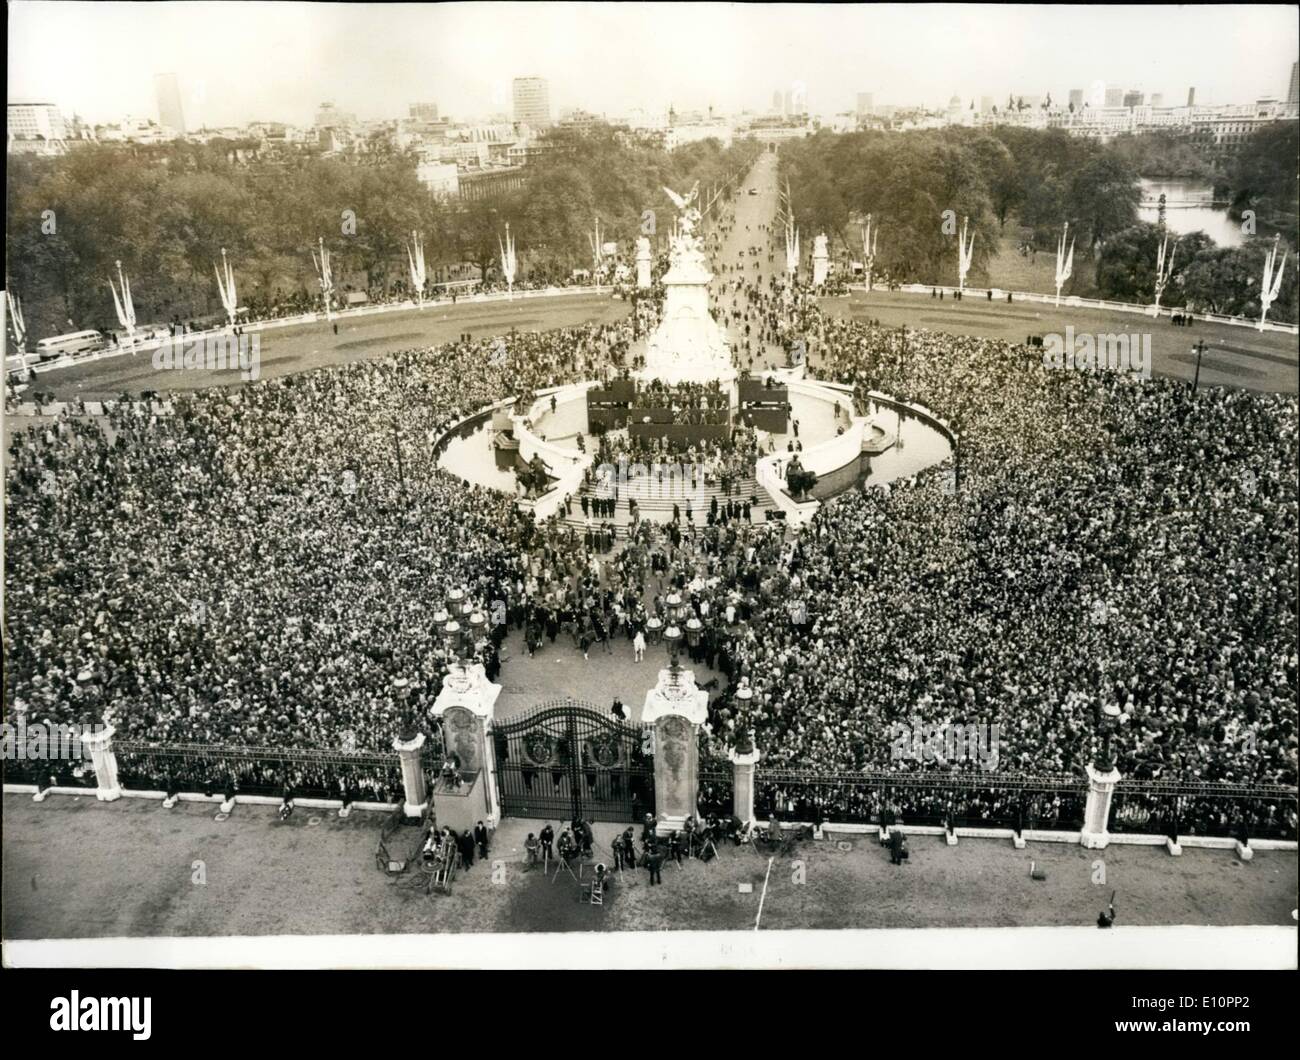 Nov. 14, 1973 - November 14th, 1973 Wedding of Princess Anne and Capt. Mark Philllips at Westminster Abbey. Photo Shows: General view showing part of the vast crowd which gathered outside Buckingham Palace as they awaited the appearance on the balcony of Princess Anne and Captain Mark Phillips, following their wedding at Westminster Abbey. Stock Photo